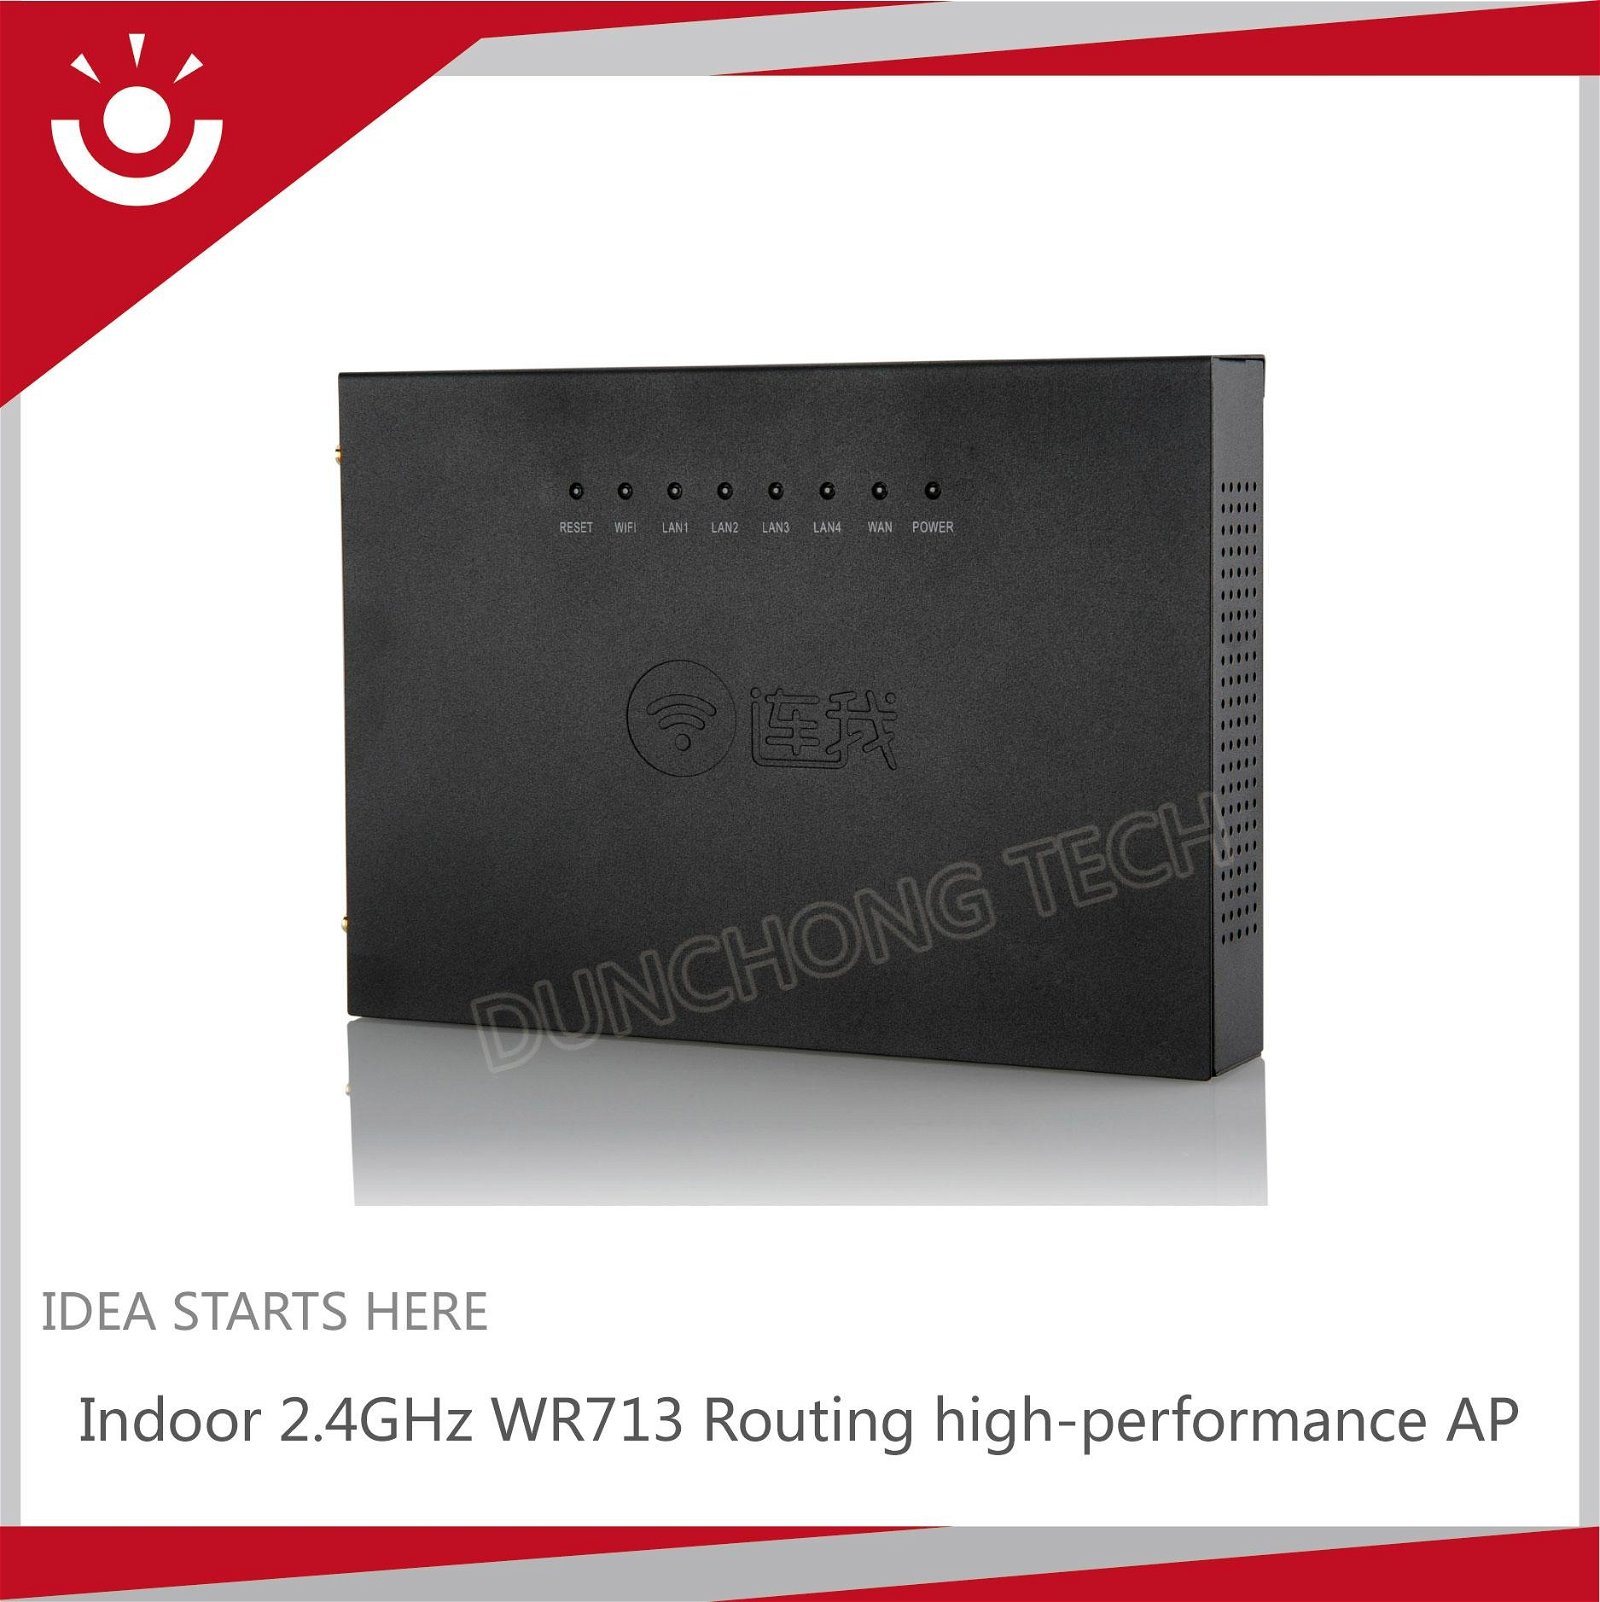 "300Mbps WR713 Indoor wifi router with high power with 802.11b/g/n " 3